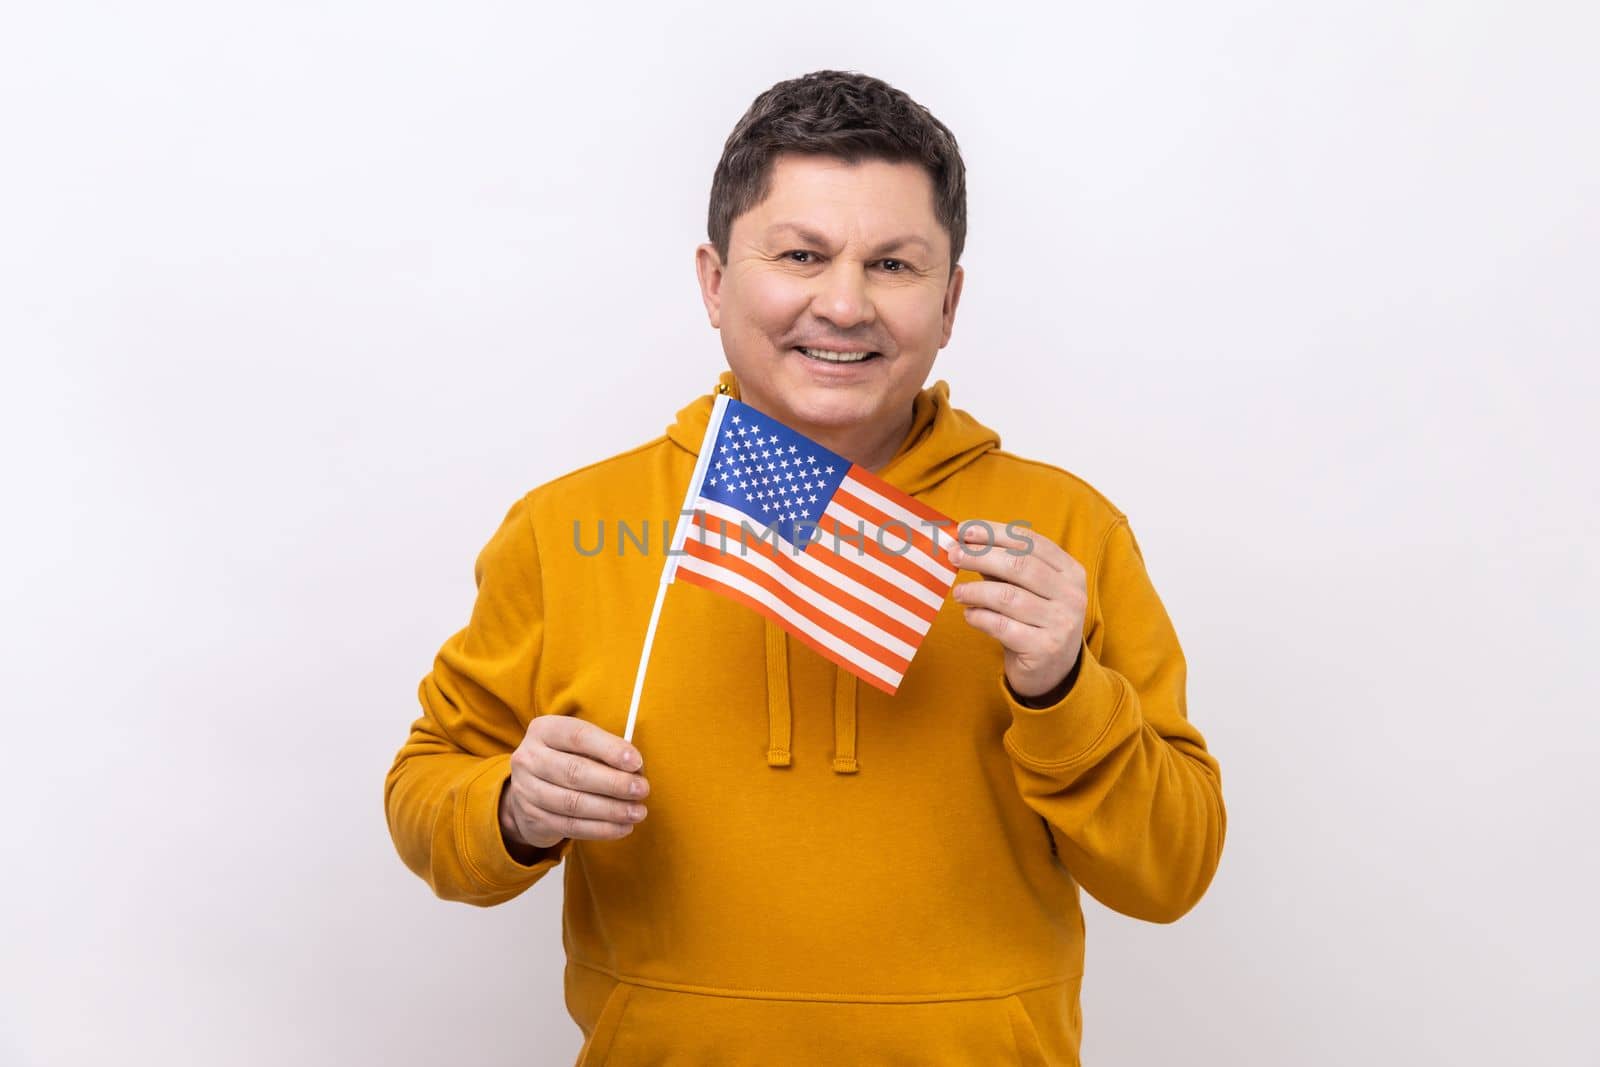 Portrait of smiling middle aged man holding USA national flag, celebrating national Independence Day - 4th july, wearing urban style hoodie. Indoor studio shot isolated on white background.